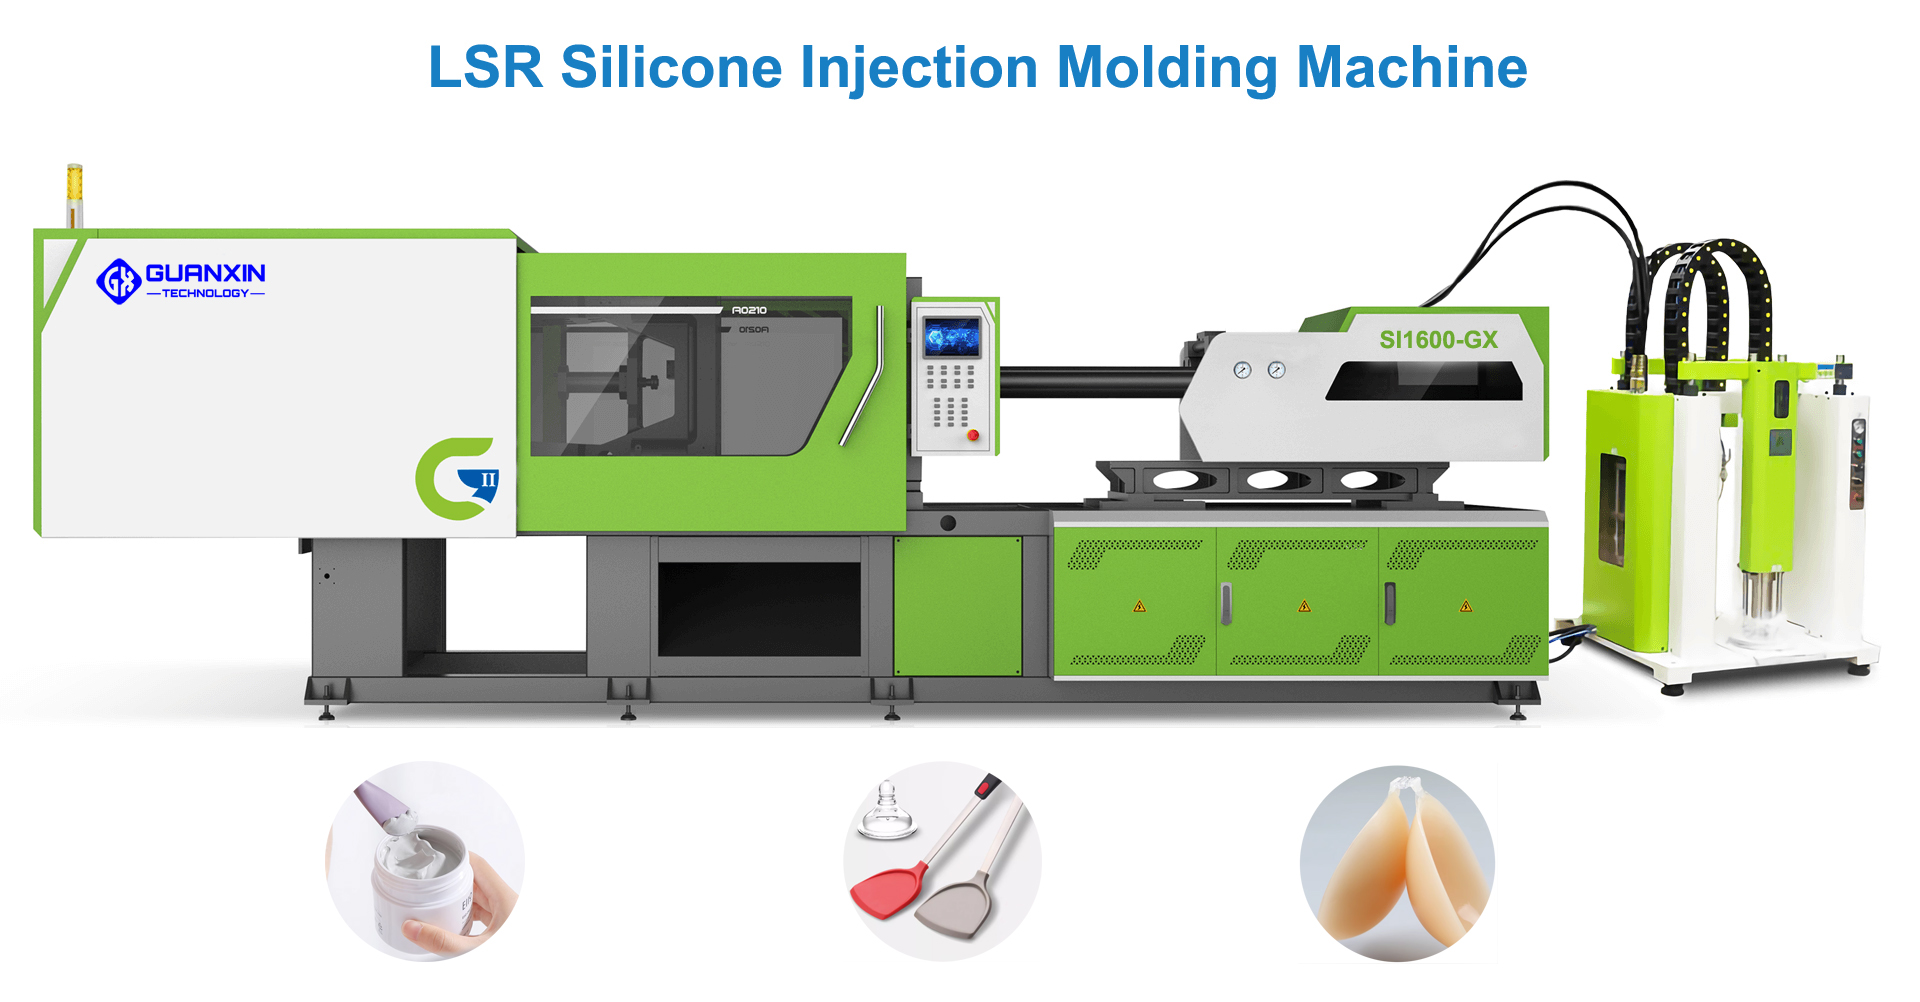 Comprehensive Guide to Liquid Silicone Injection Molding Machines